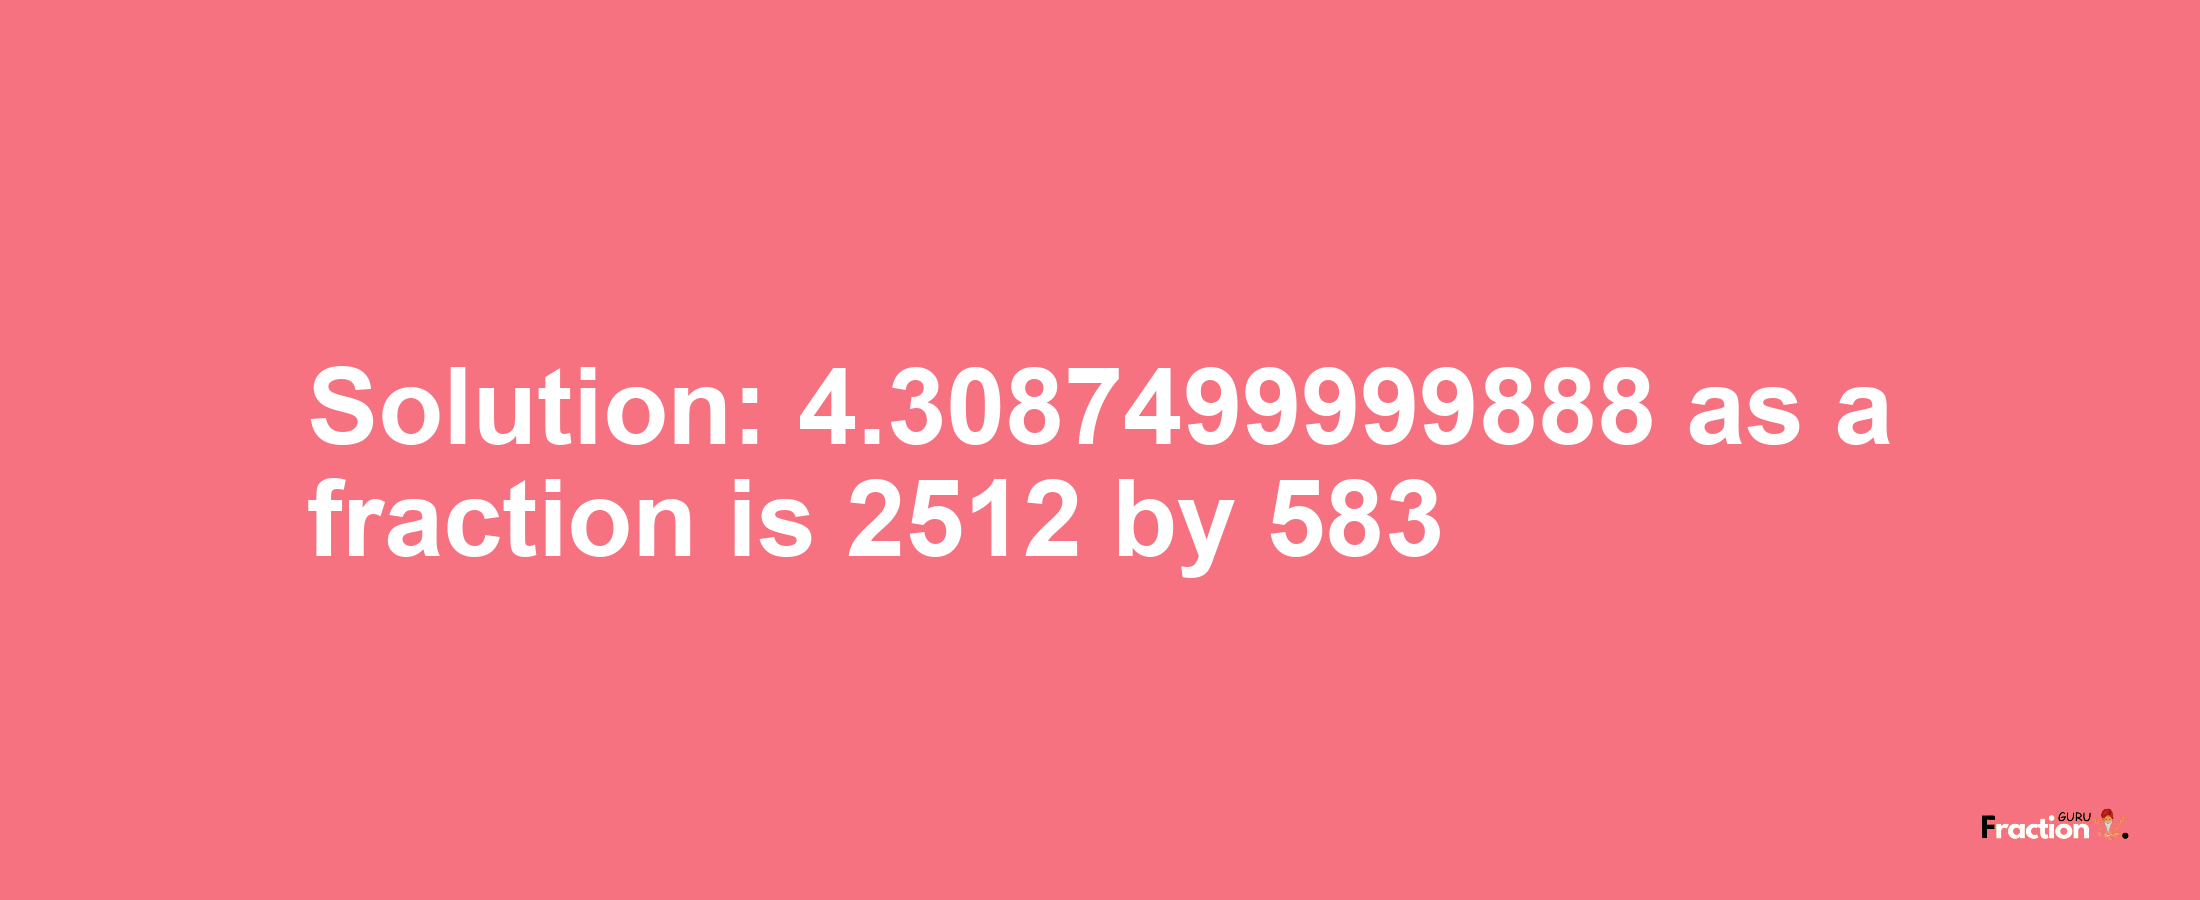 Solution:4.3087499999888 as a fraction is 2512/583